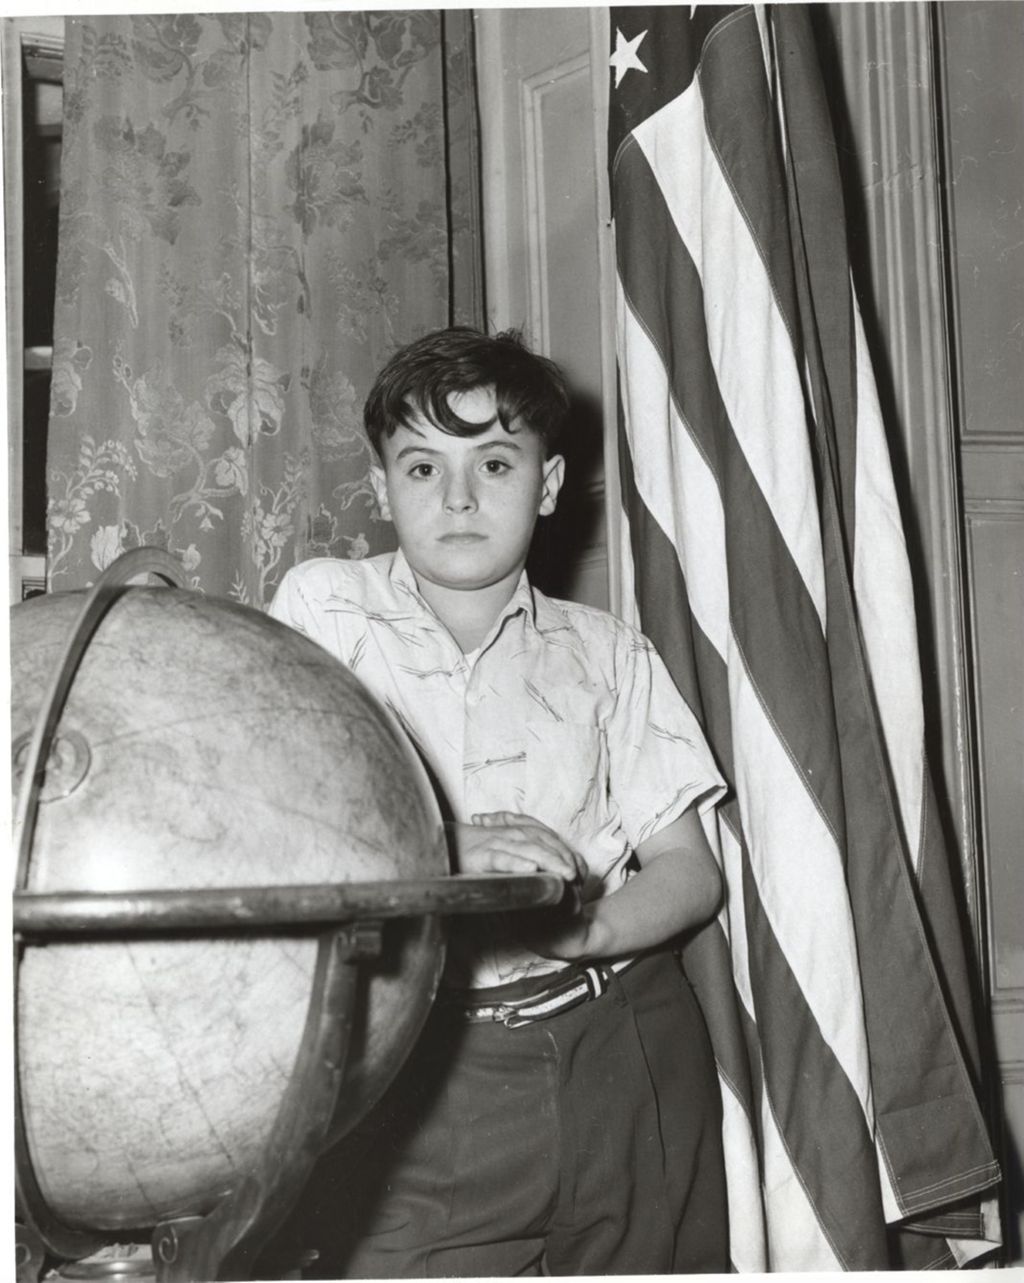 Miniature of Boy standing with globe and U.S. flag